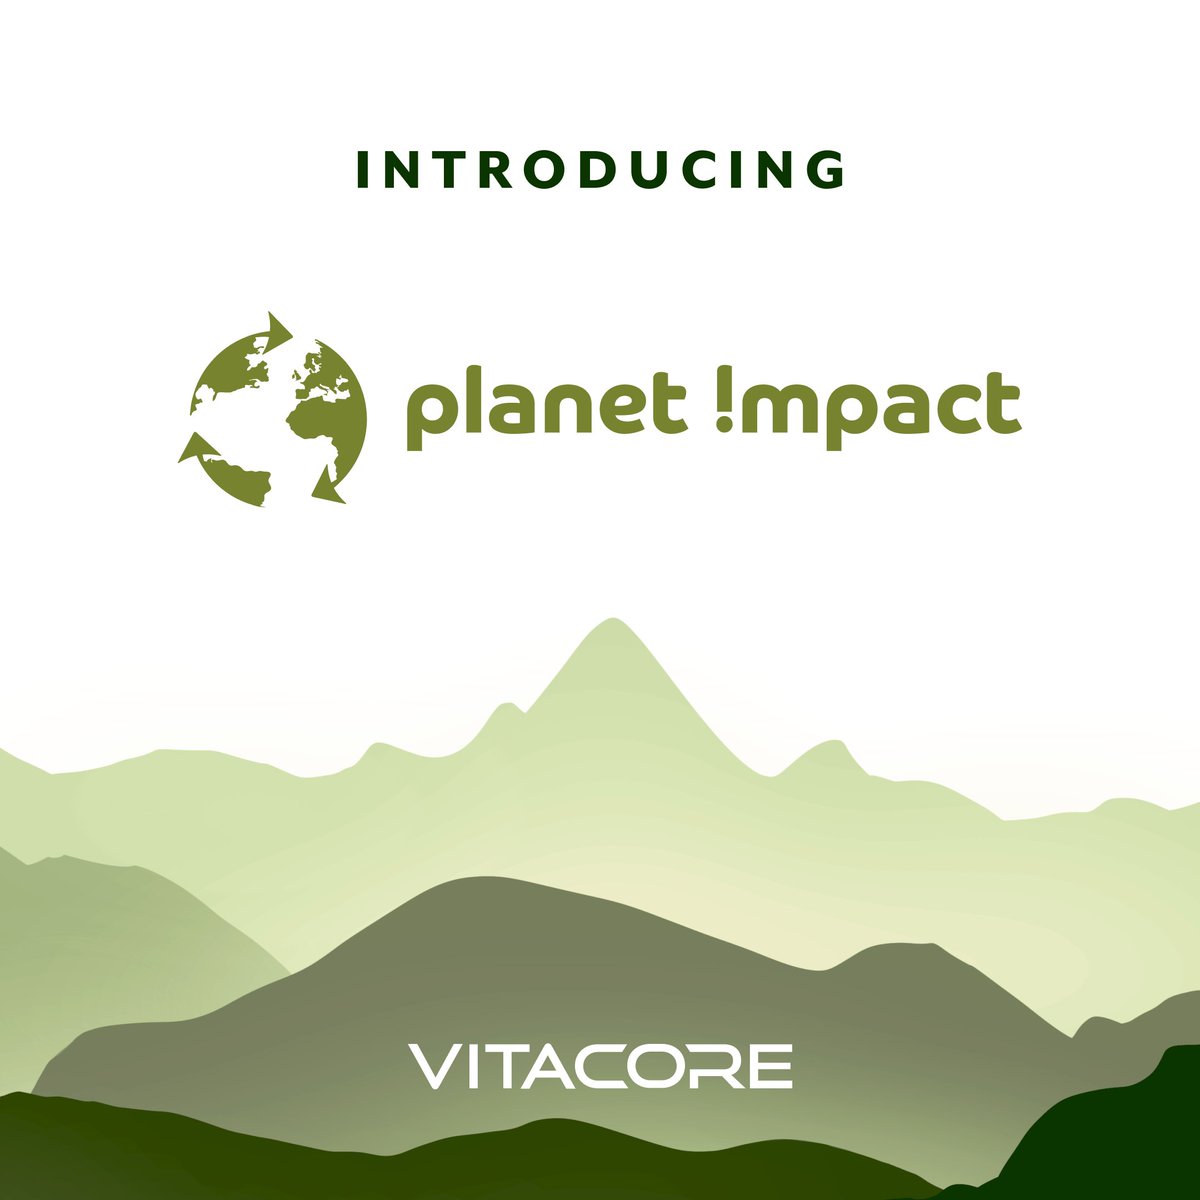 Vitacore is proud to announce the launch of Planet Impact, a recycling program that focuses on hard-to-recycle plastic waste. Learn more about Planet Impact on our website or at vitacore.pulse.ly/11au9uavxb #MakeAnImpact #Recycling #SaveOurPlanet